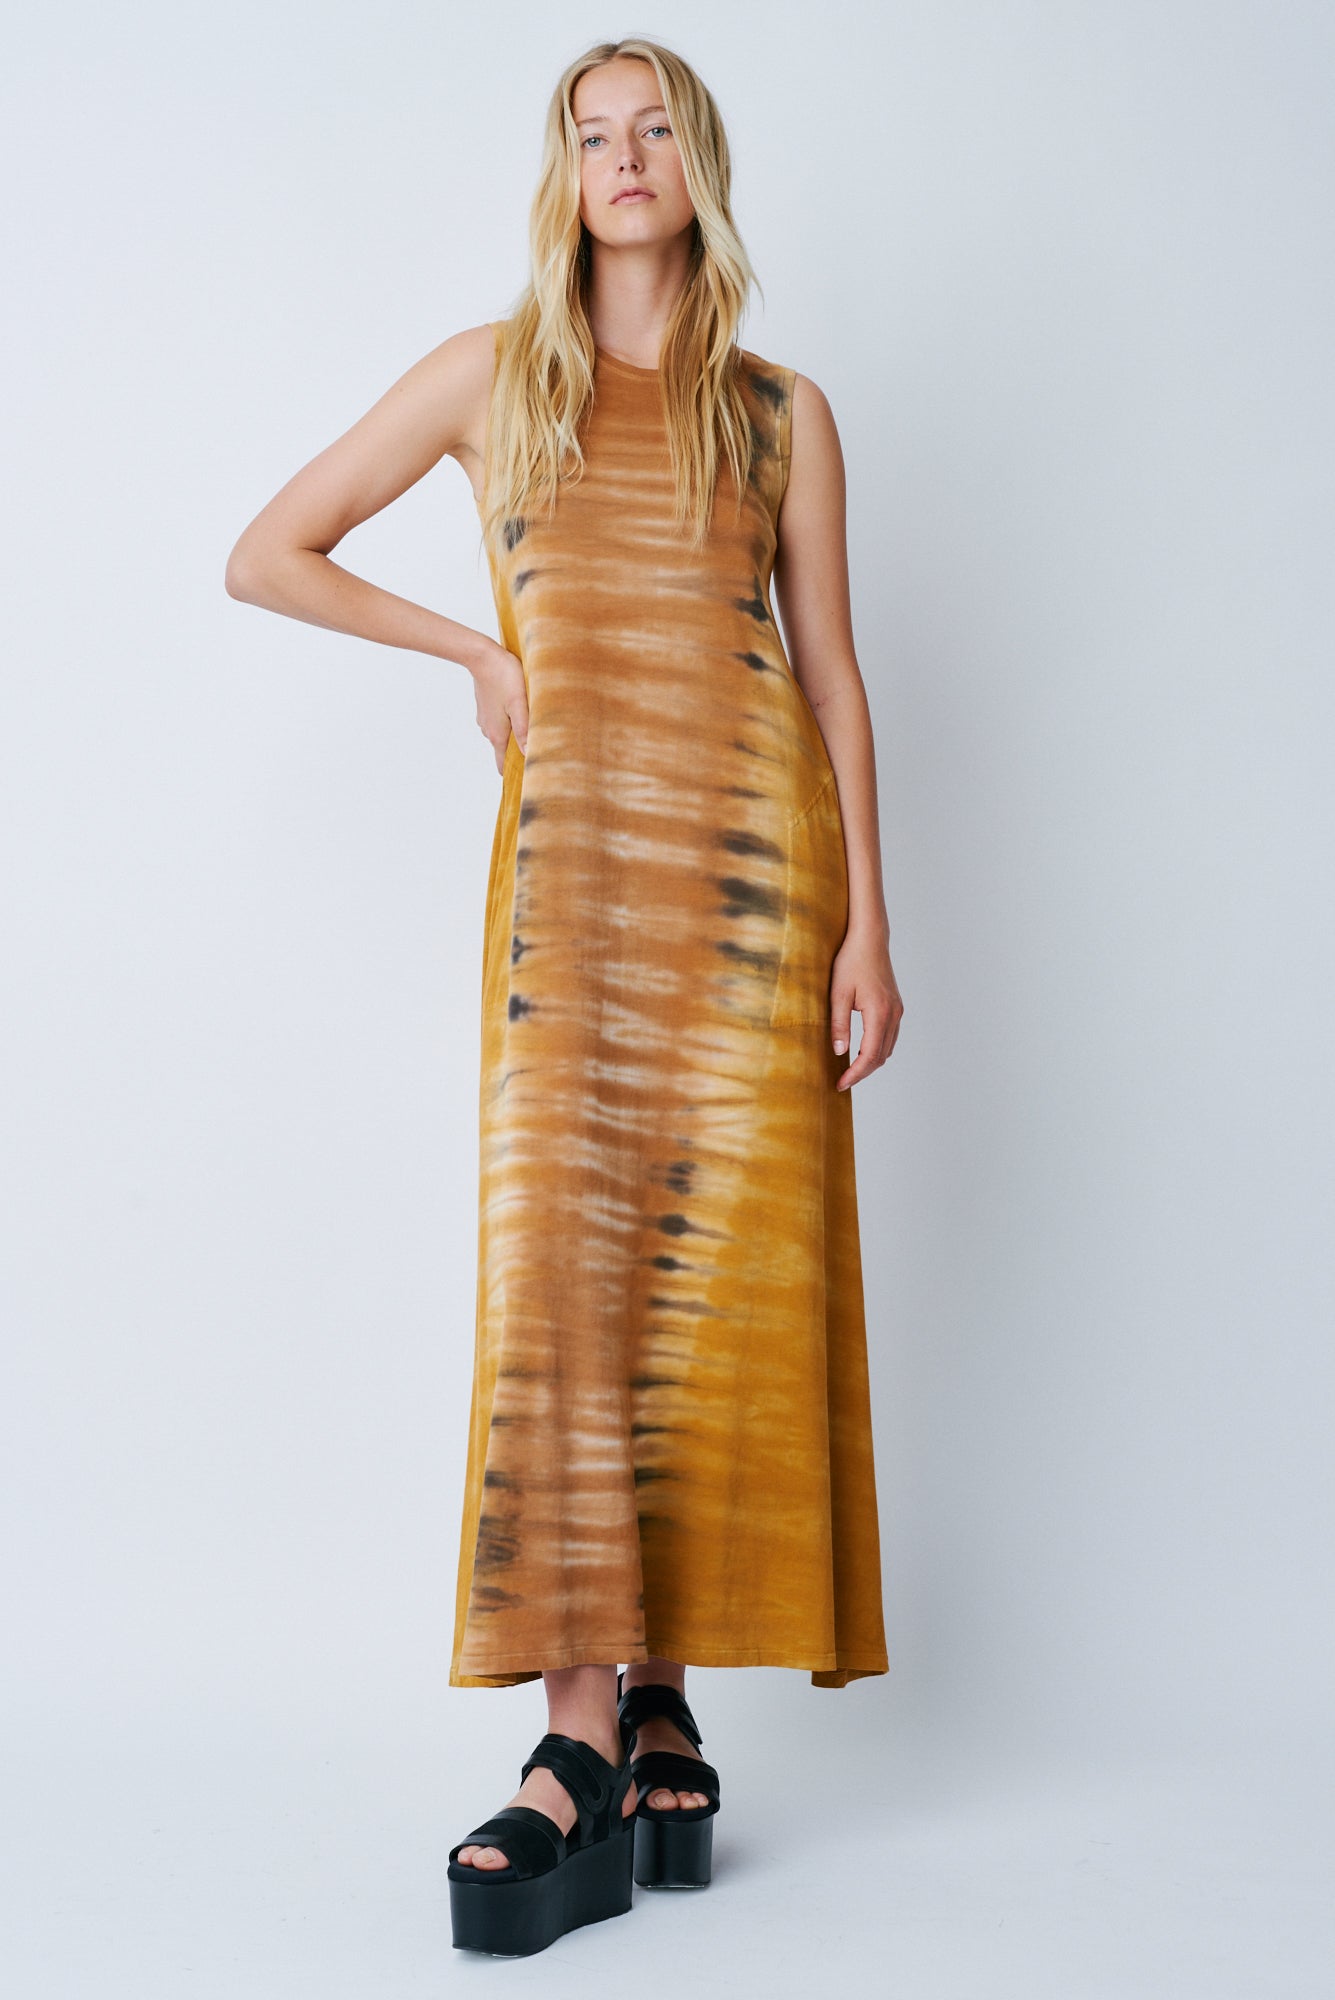 Bengal Tiger Tie Dye Classic Jersey Sleeveless Drama Maxi Dress Full Front View